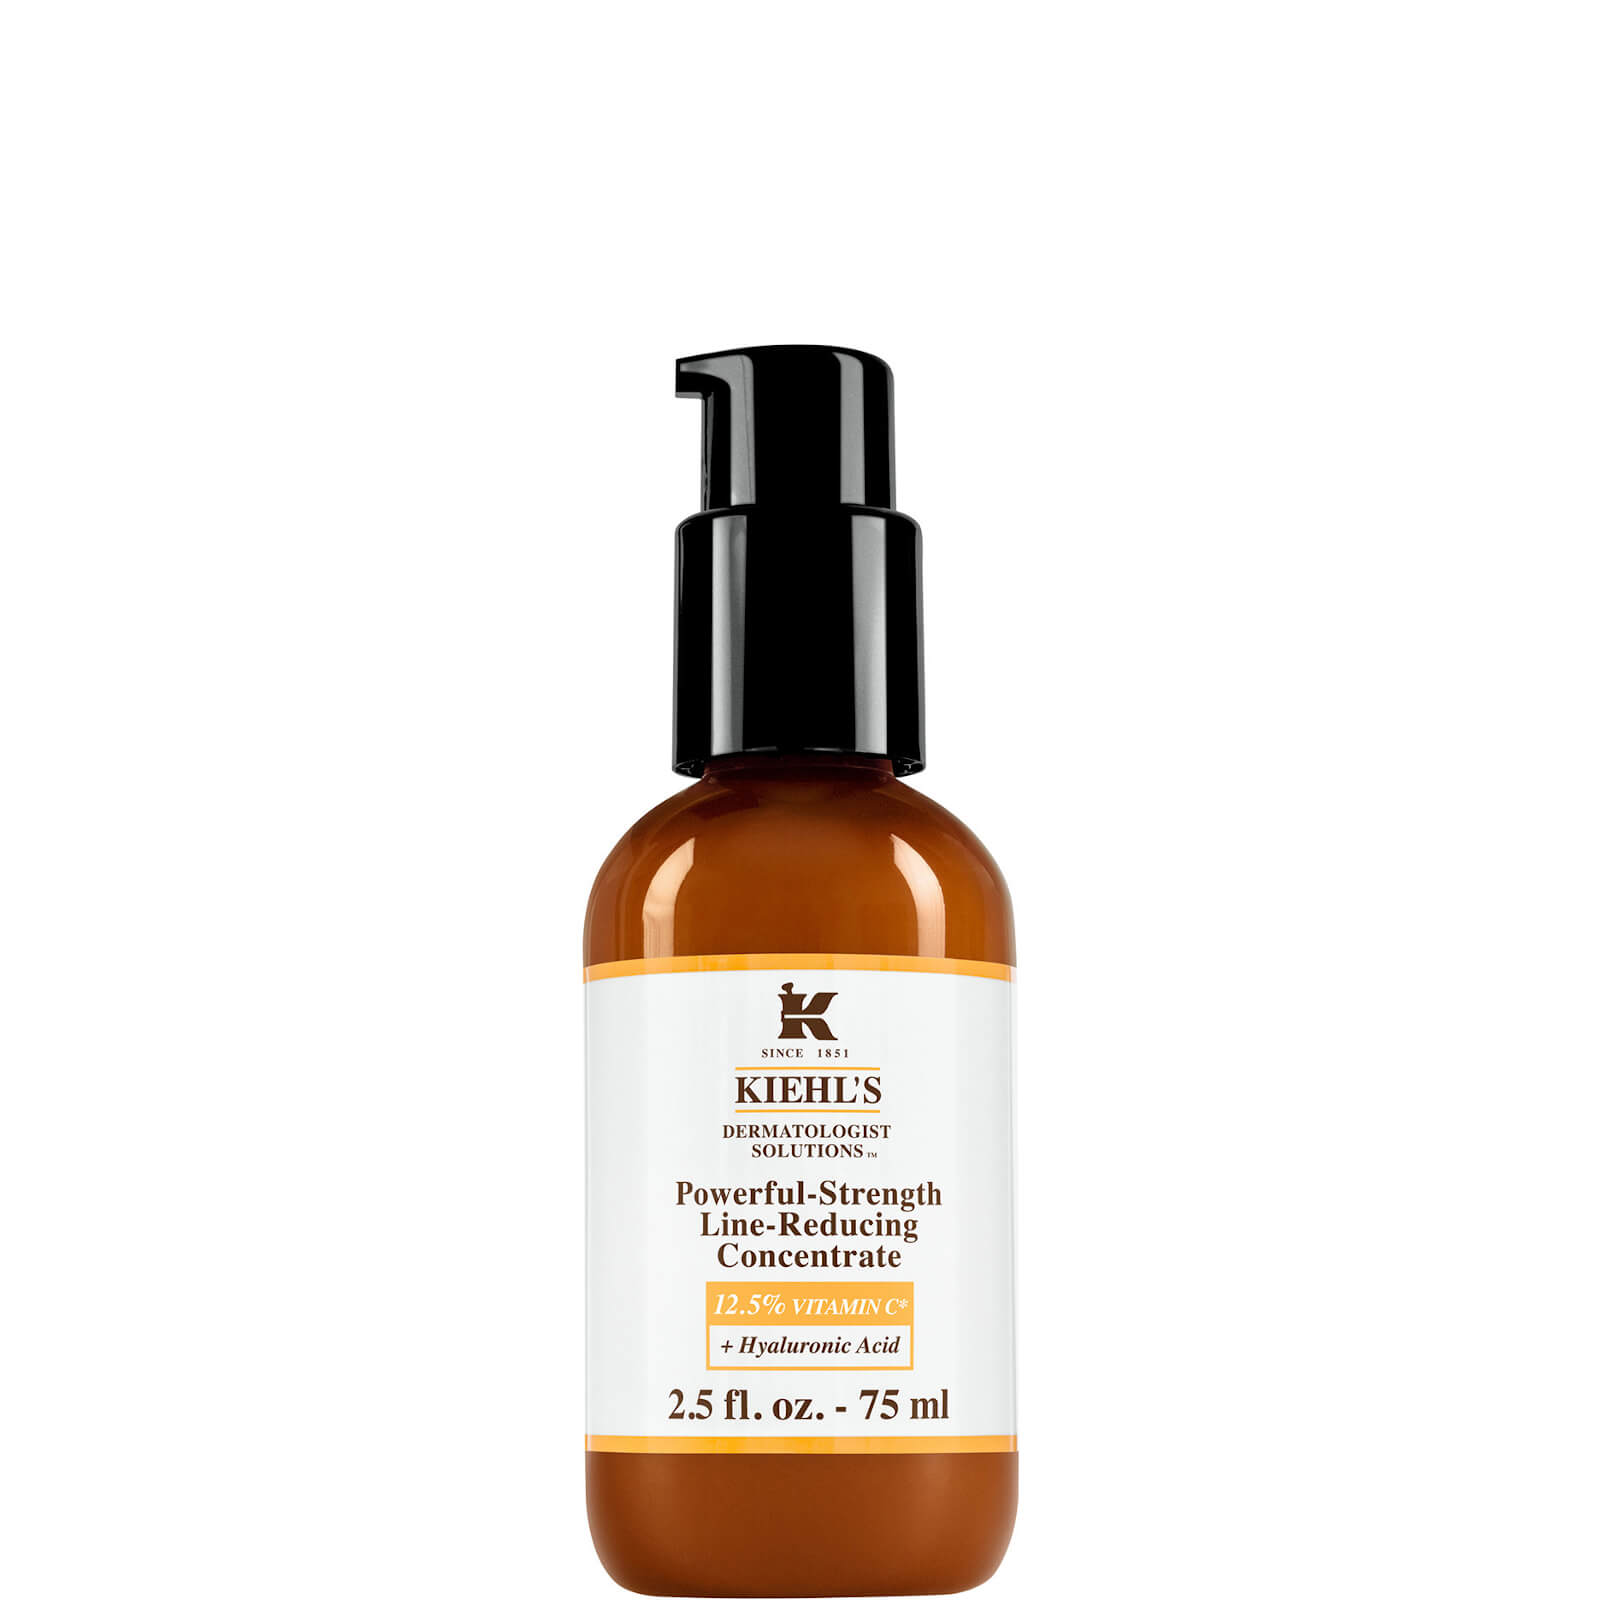 Kiehl’s Powerful-Strength Line-Reducing Concentrate (Various Sizes) – 75ml